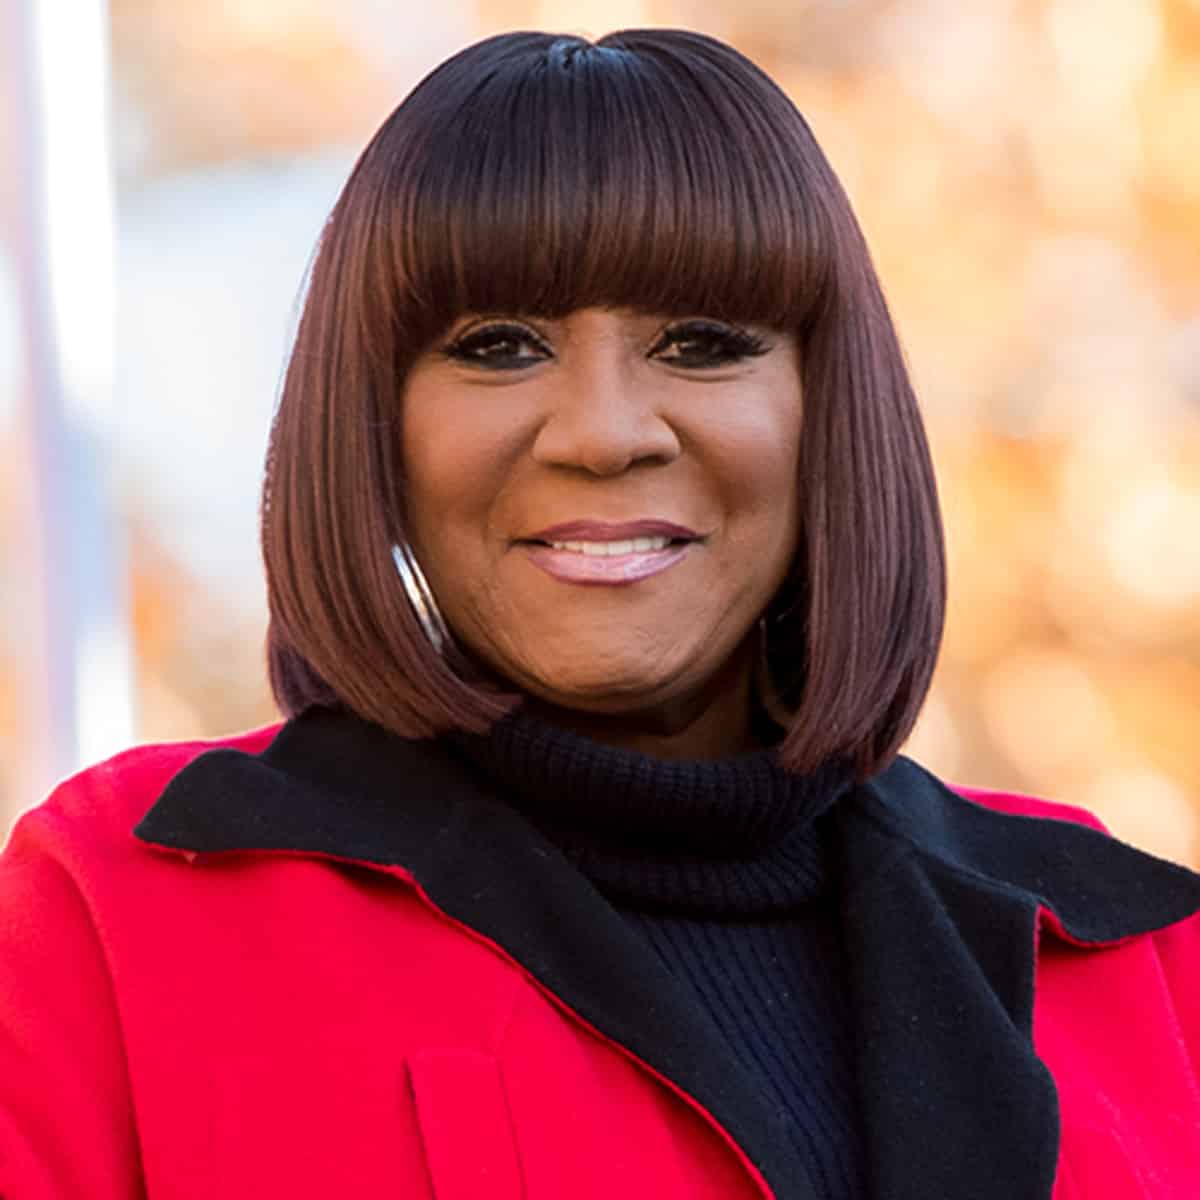 Who is Patti LaBelle